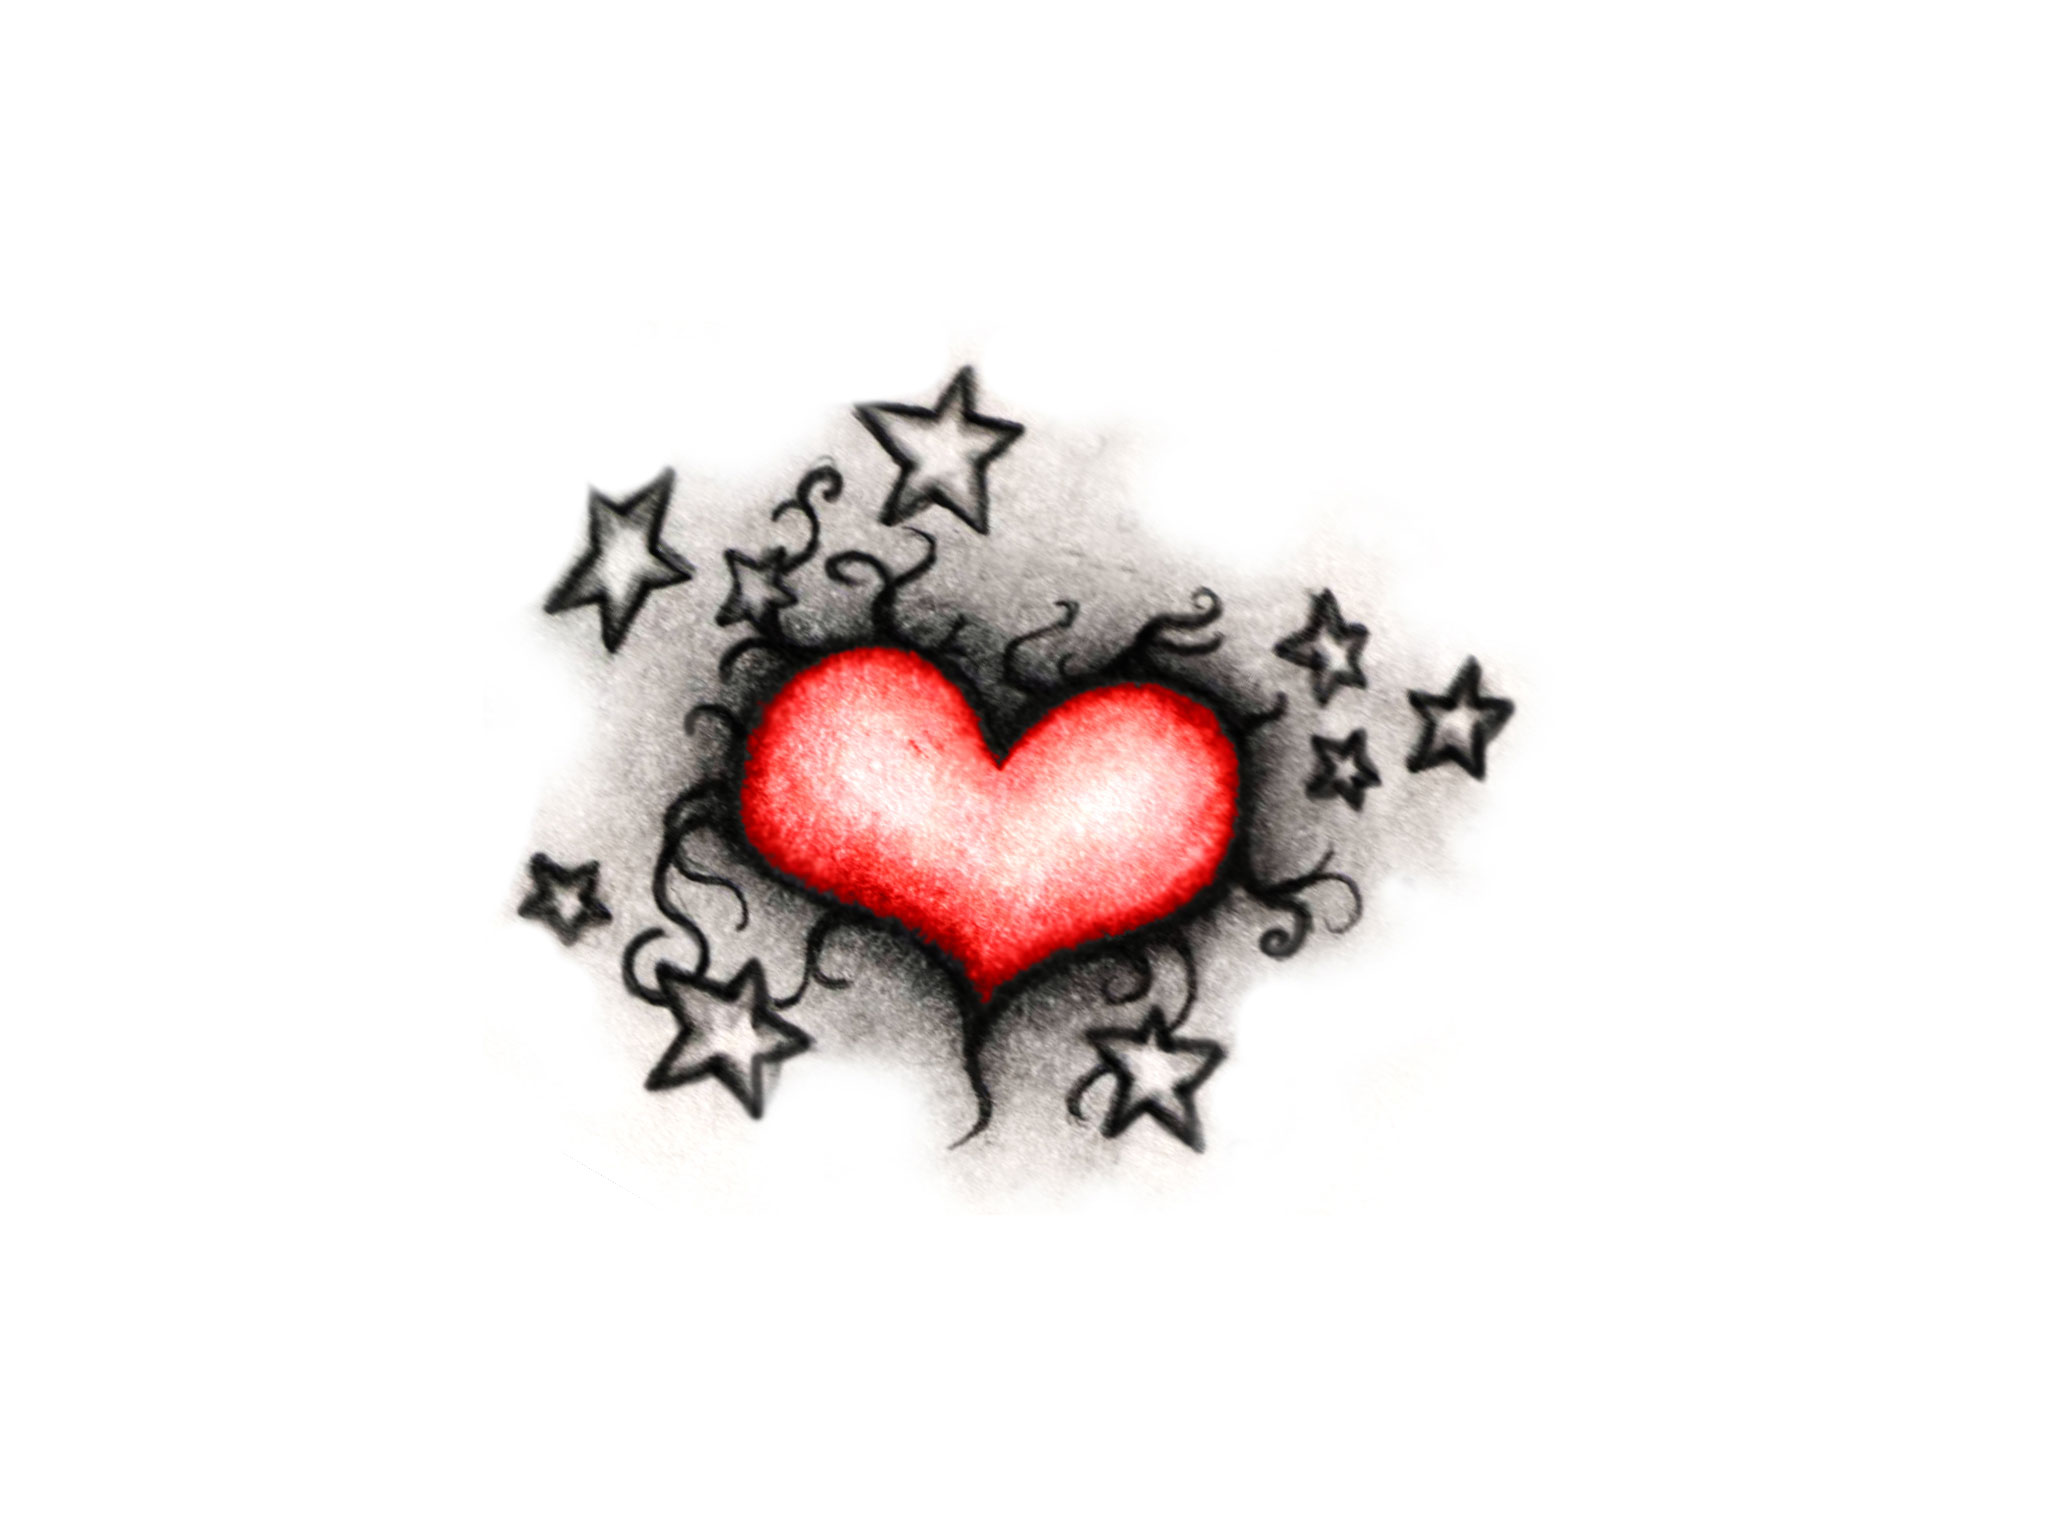 Beautiful Stars And Heart Tattoo Design - Love You With Every Breath -  2048x1536 Wallpaper 